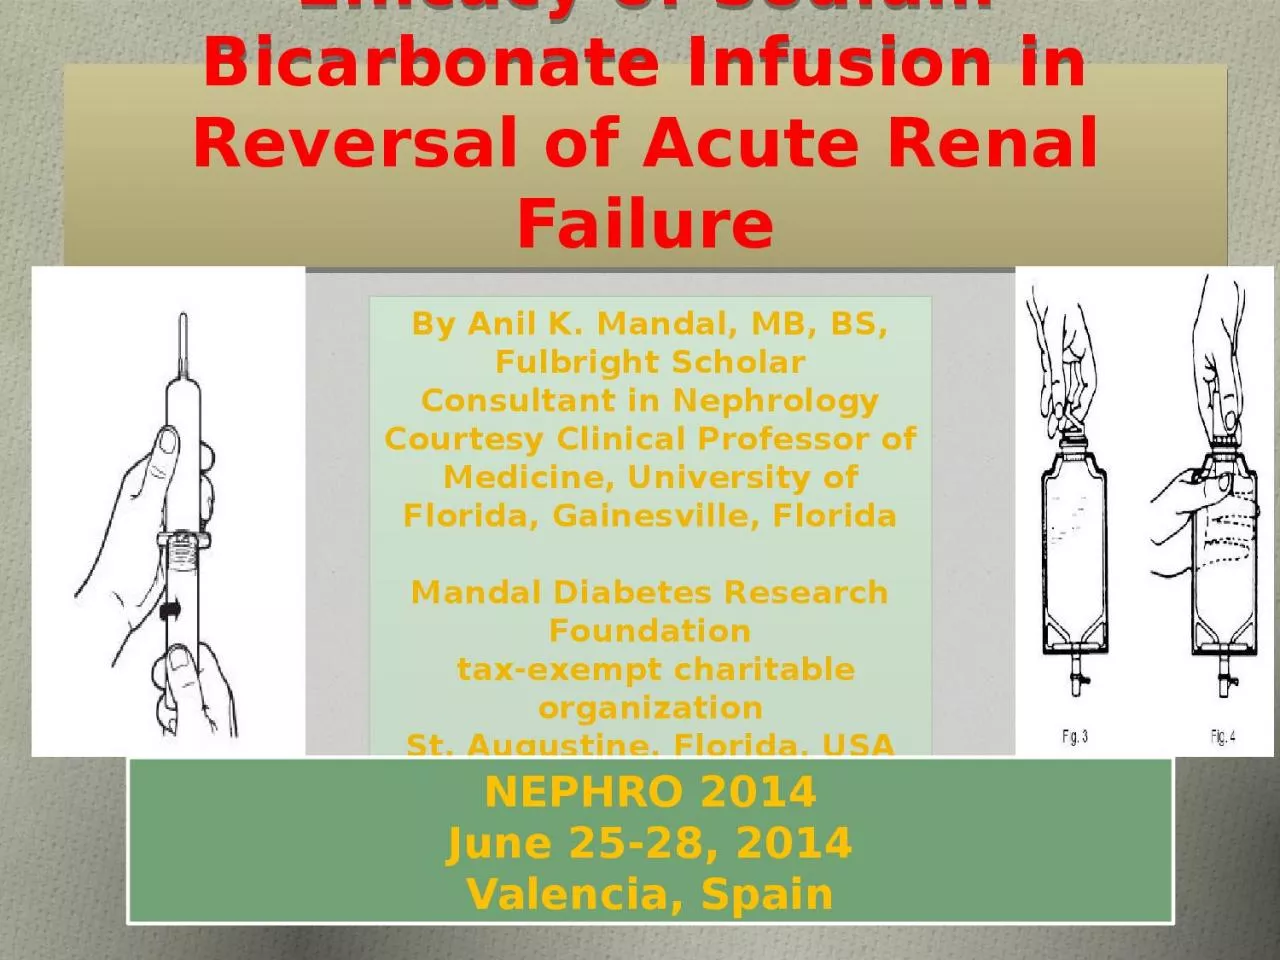 Efficacy of Sodium Bicarbonate Infusion in Reversal of Acute Renal Failure